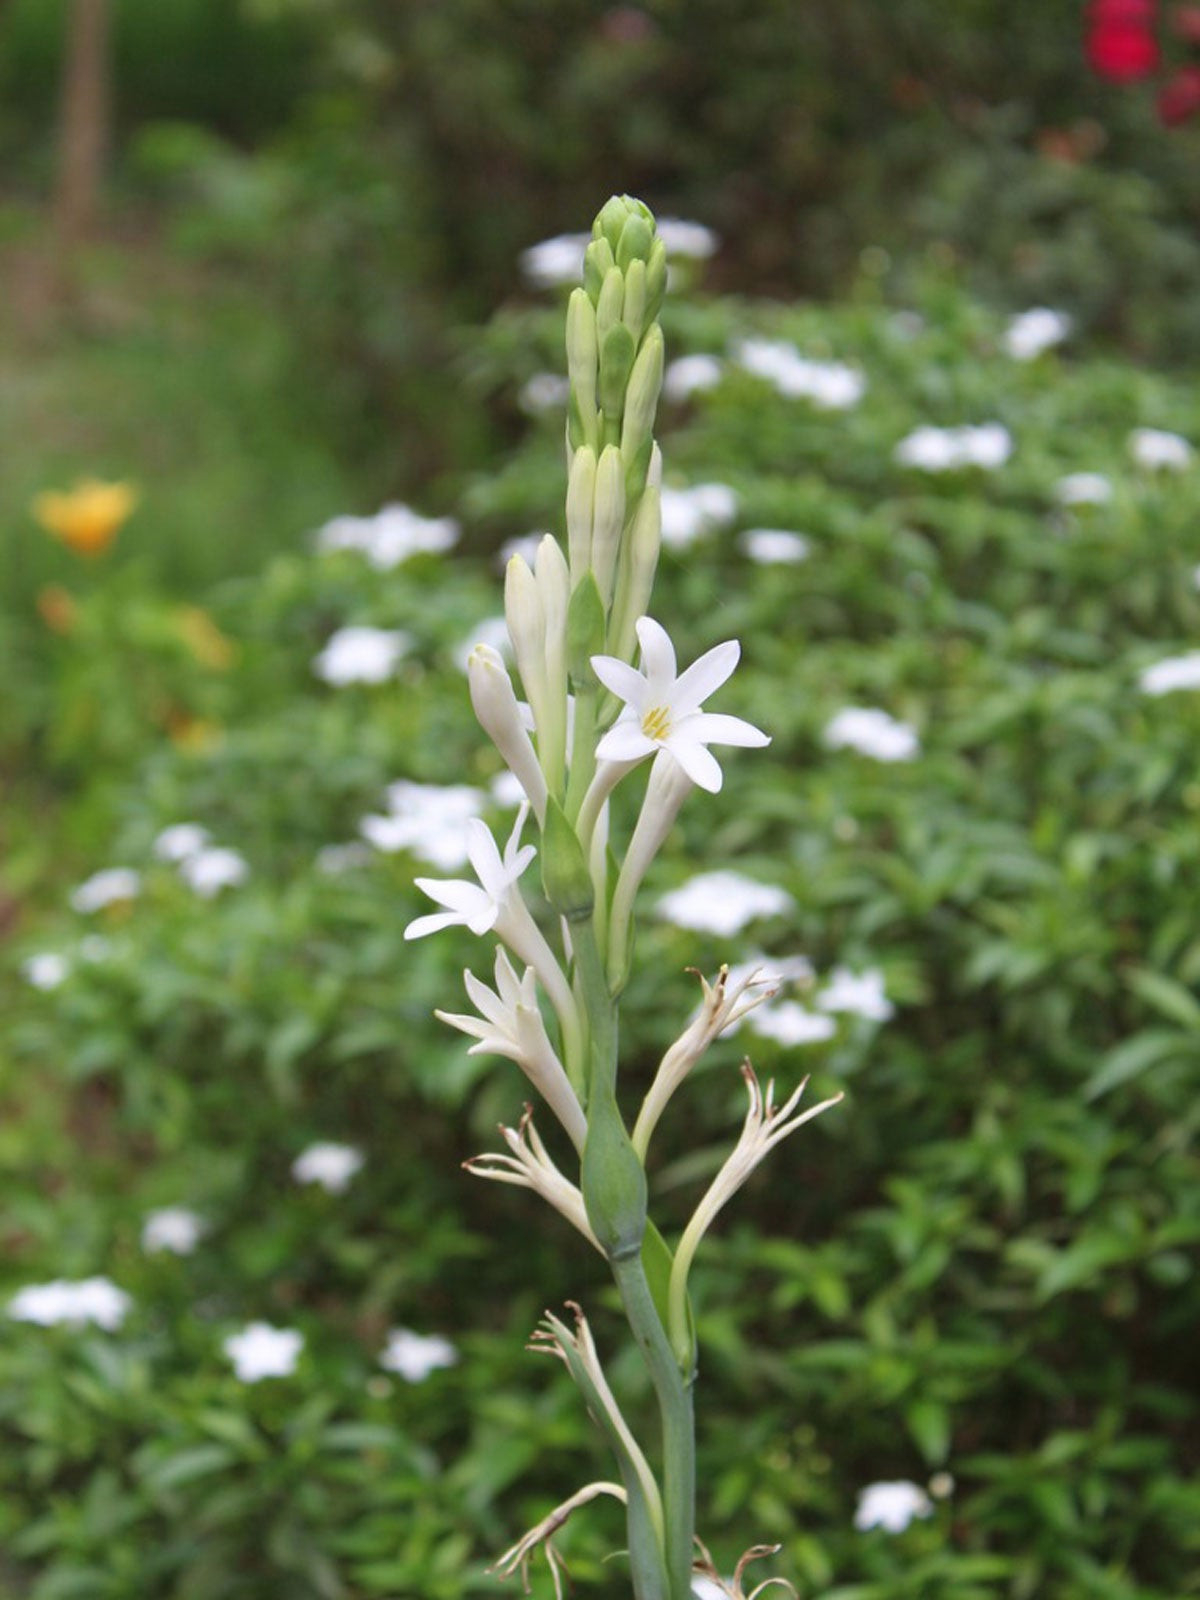 Dividing Tuberose Plants – How And When To Divide Tuberose Bulbs